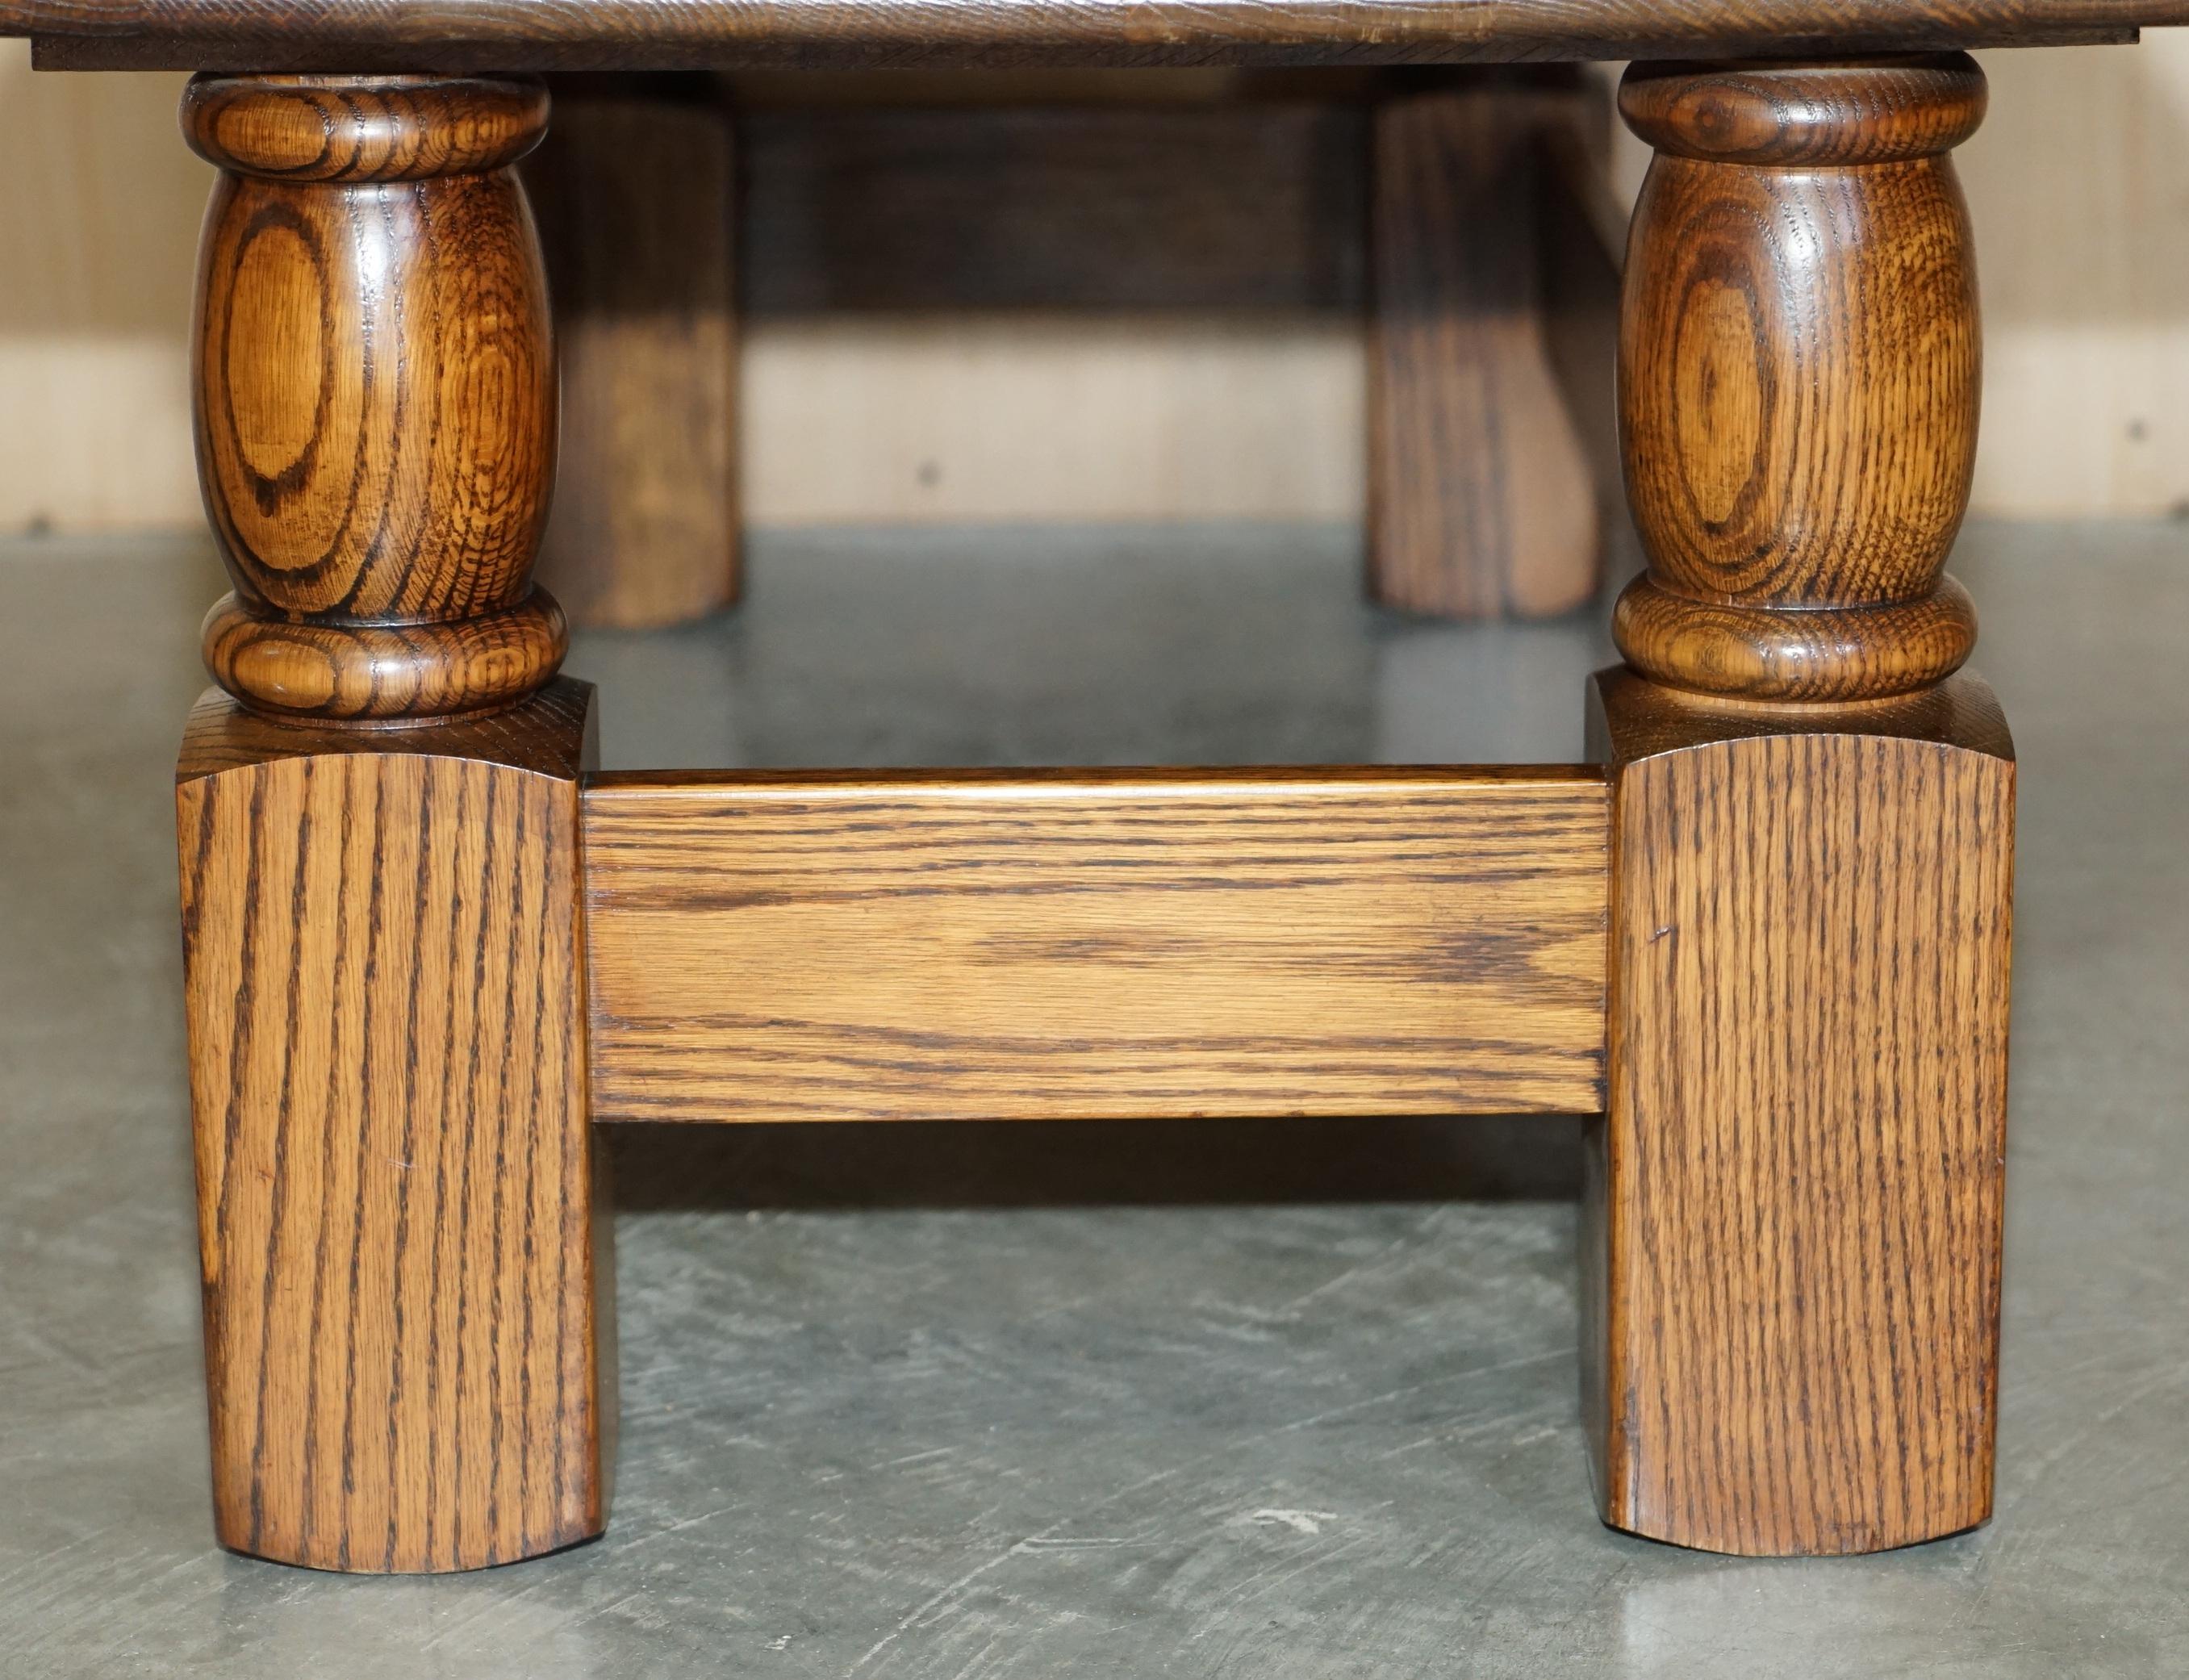 Vintage English Oak Coffee Table Made in the Style of Edwardian Refectory Tables For Sale 8